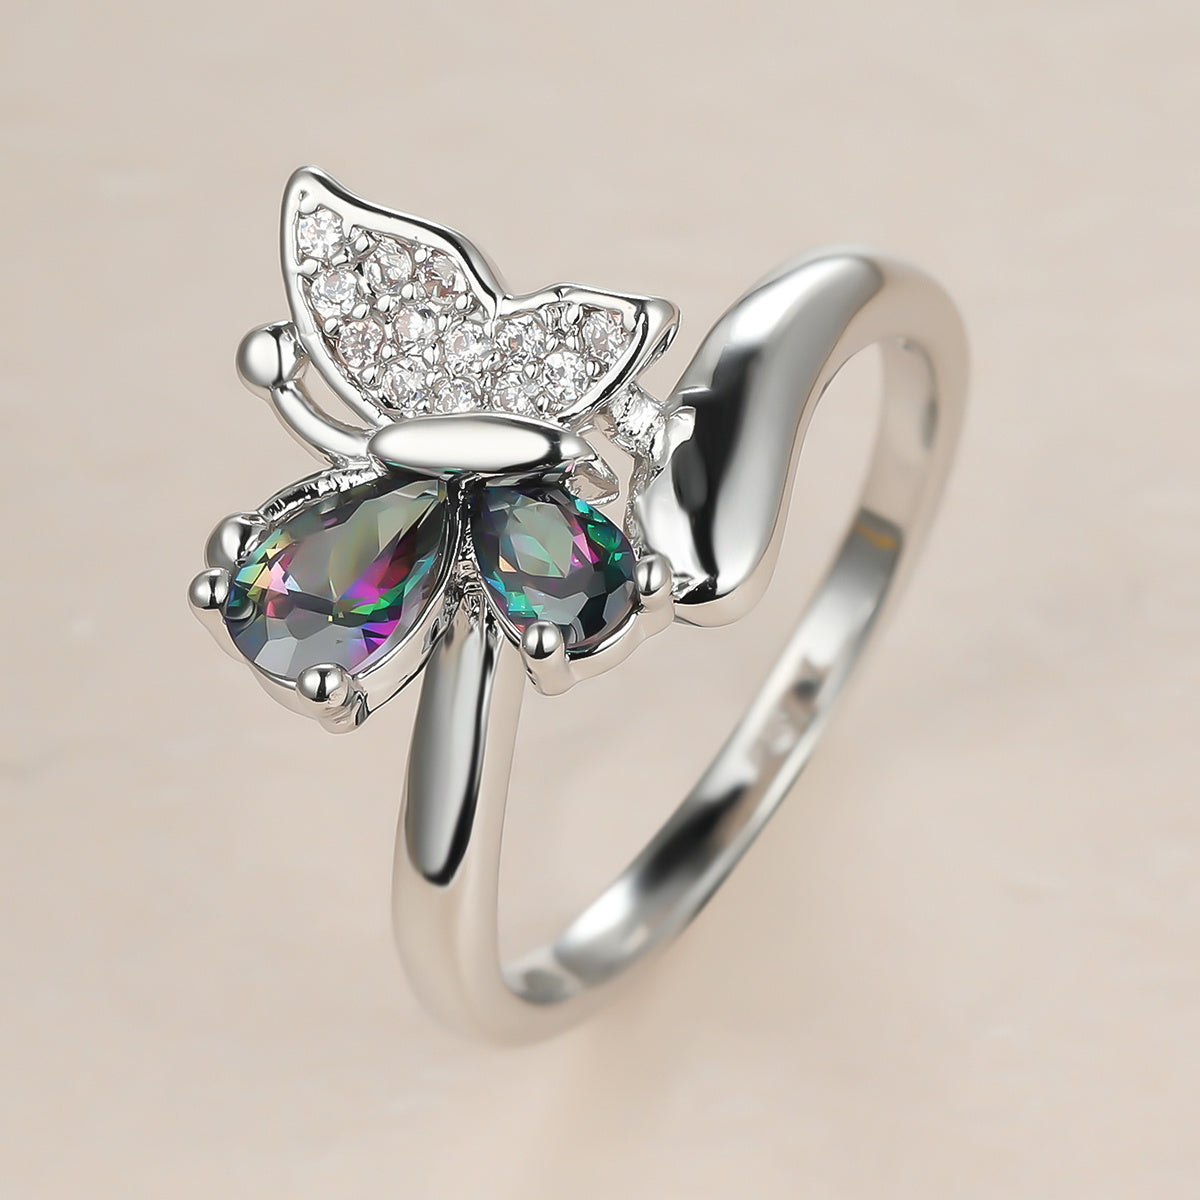 Gorgeous Platinum Butterfly Ring with Mystic Rainbow Zircon Crystals